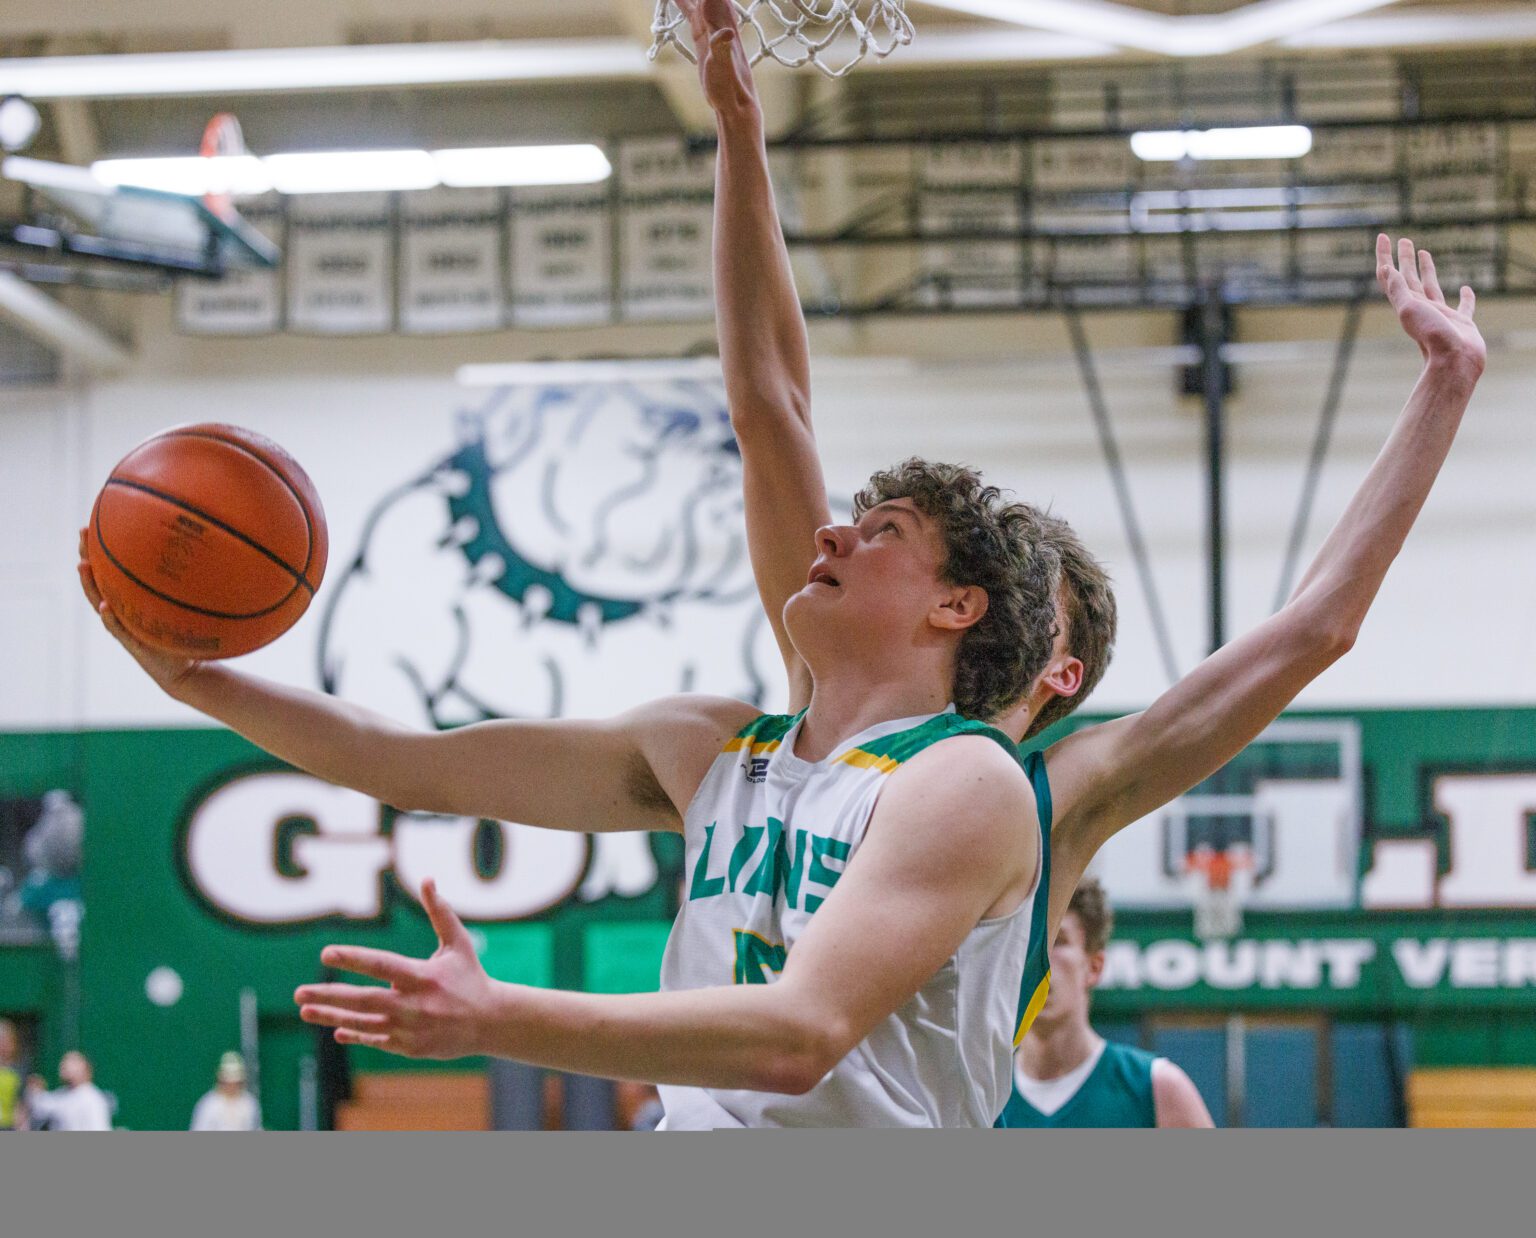 Lynden’s Trey Smiley goes under the basket for a shot as Lynden beat Sehome 76-49 at Mount Vernon High on Feb. 18.